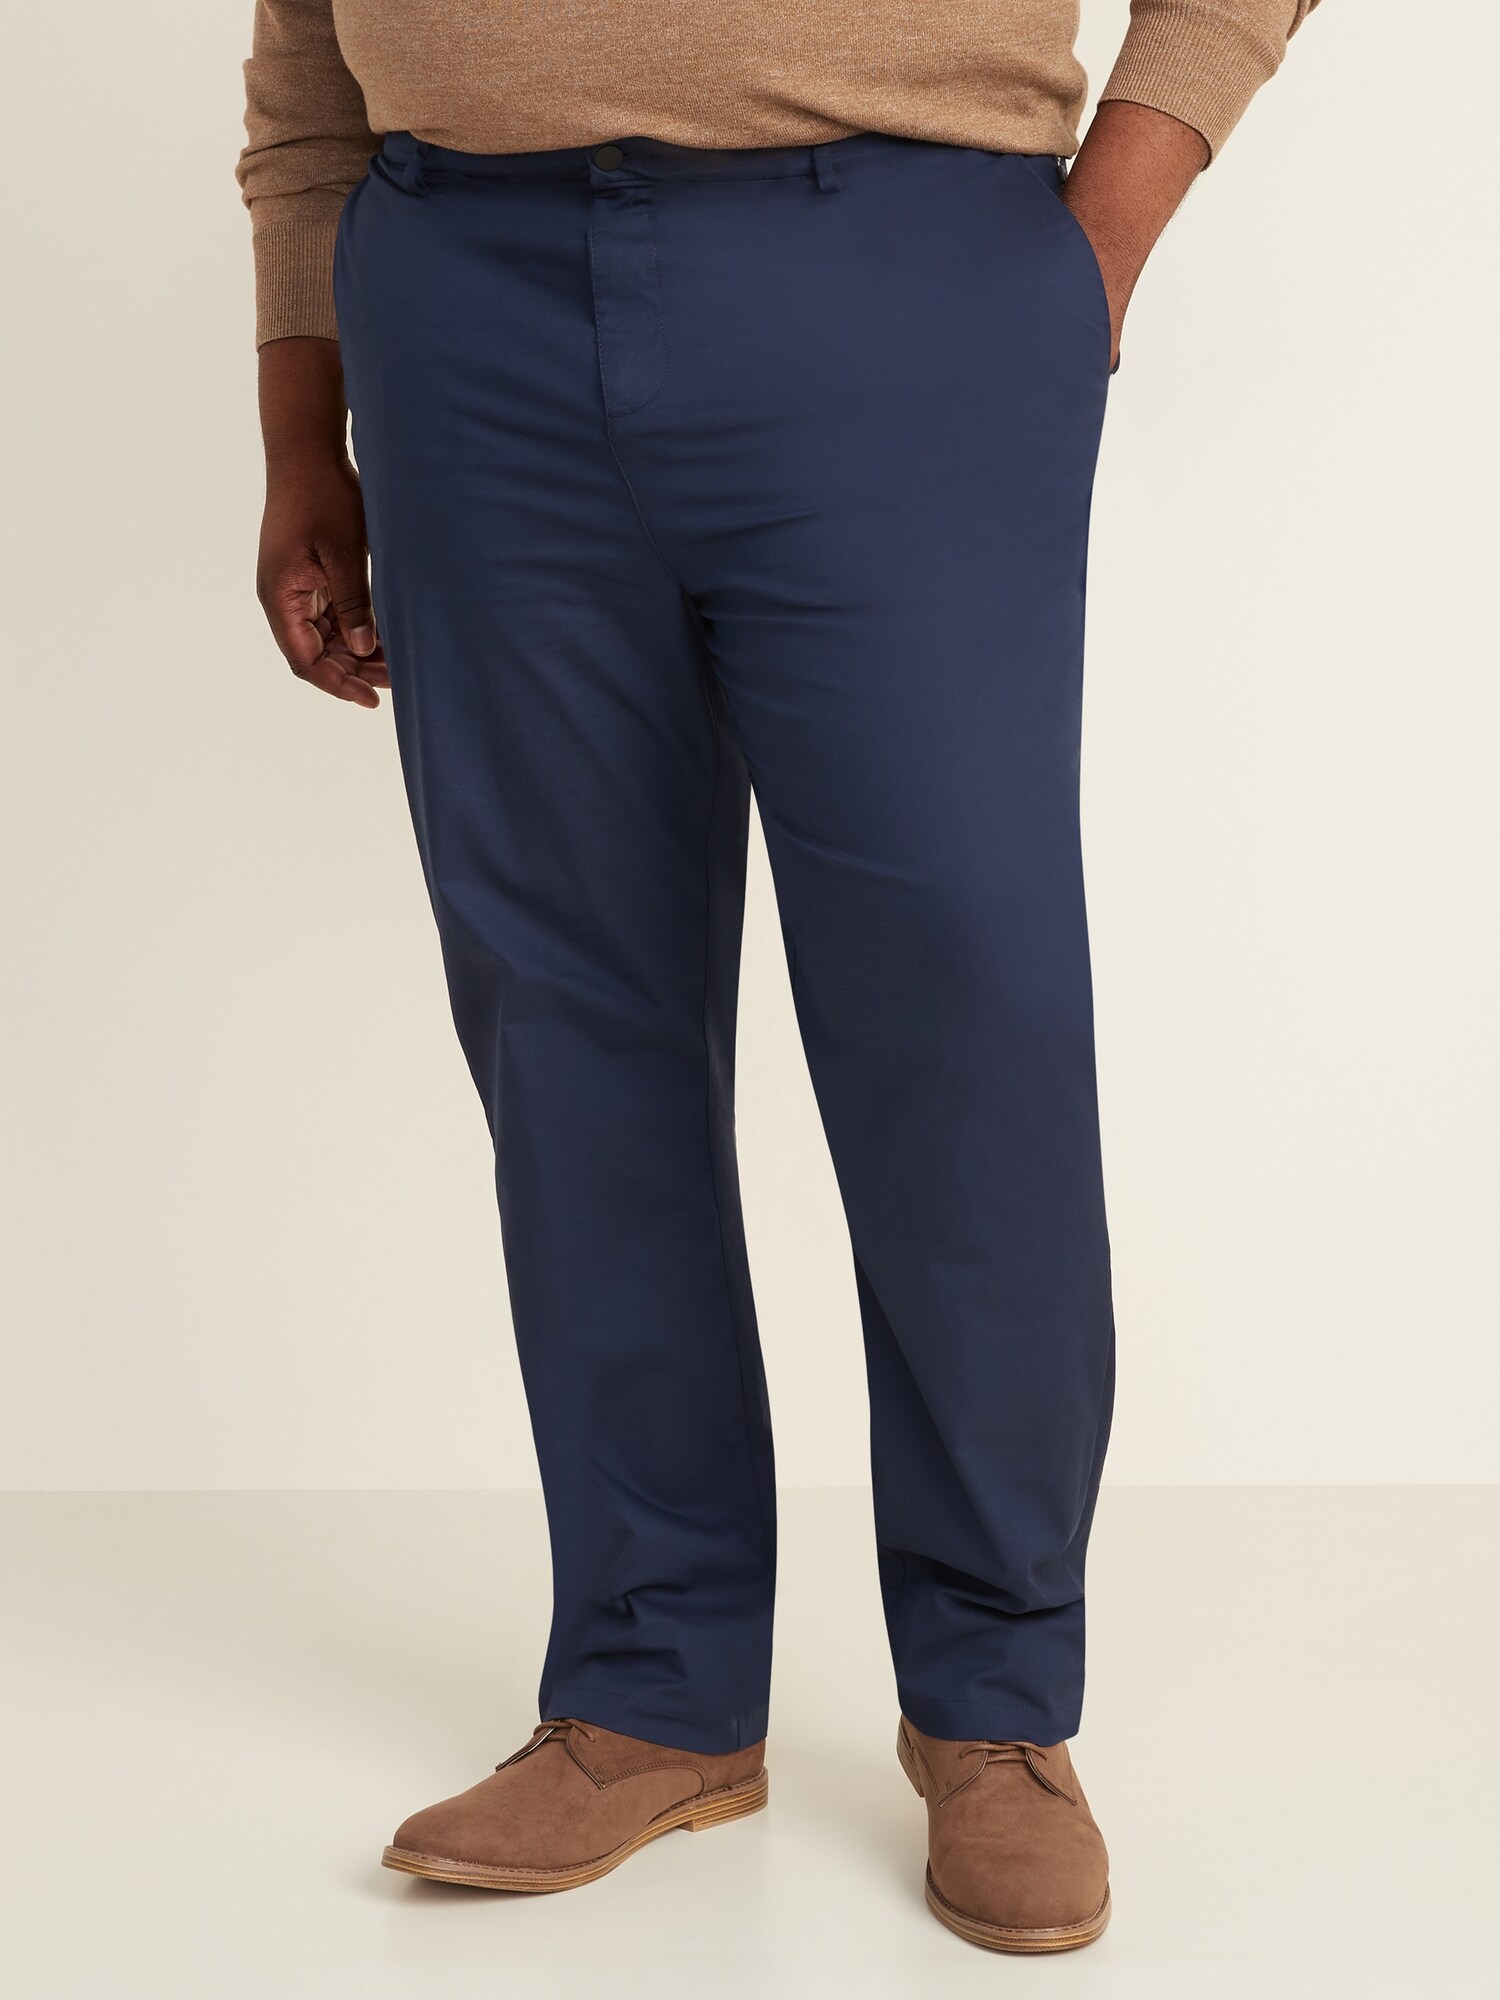 Slim Built-In Flex Ultimate Tech Chino Pants for Men | Old Navy